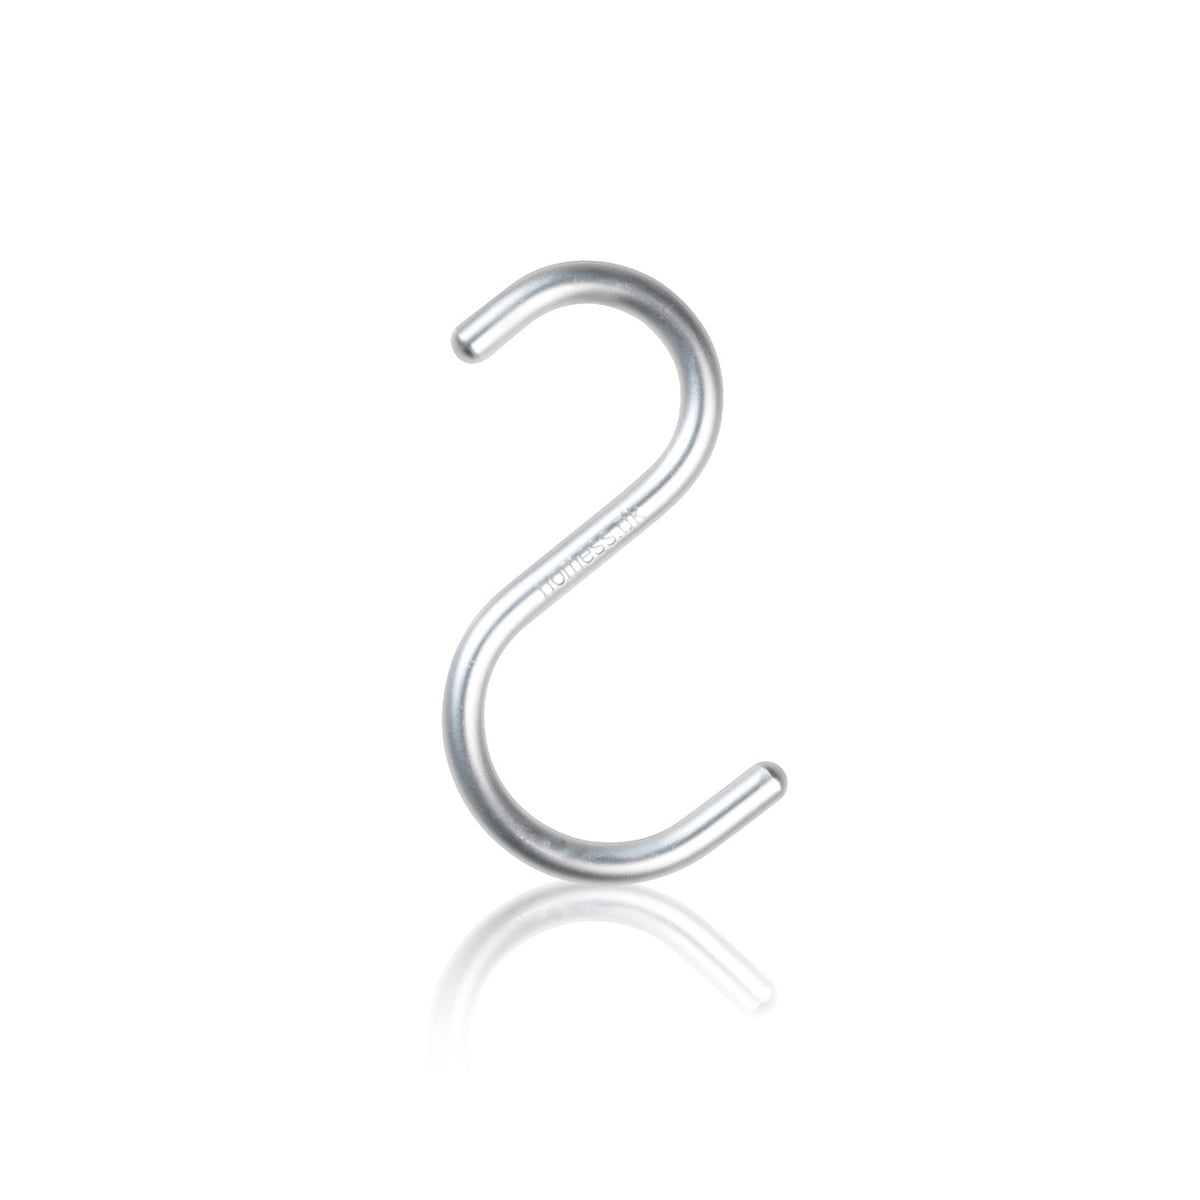 Workplace Ideal for Kitchen Garden Office NXG 6-Pack 4.5 Inches S Shape Hooks,Heavy-Duty Stainless Steel Hanging Hooks Home